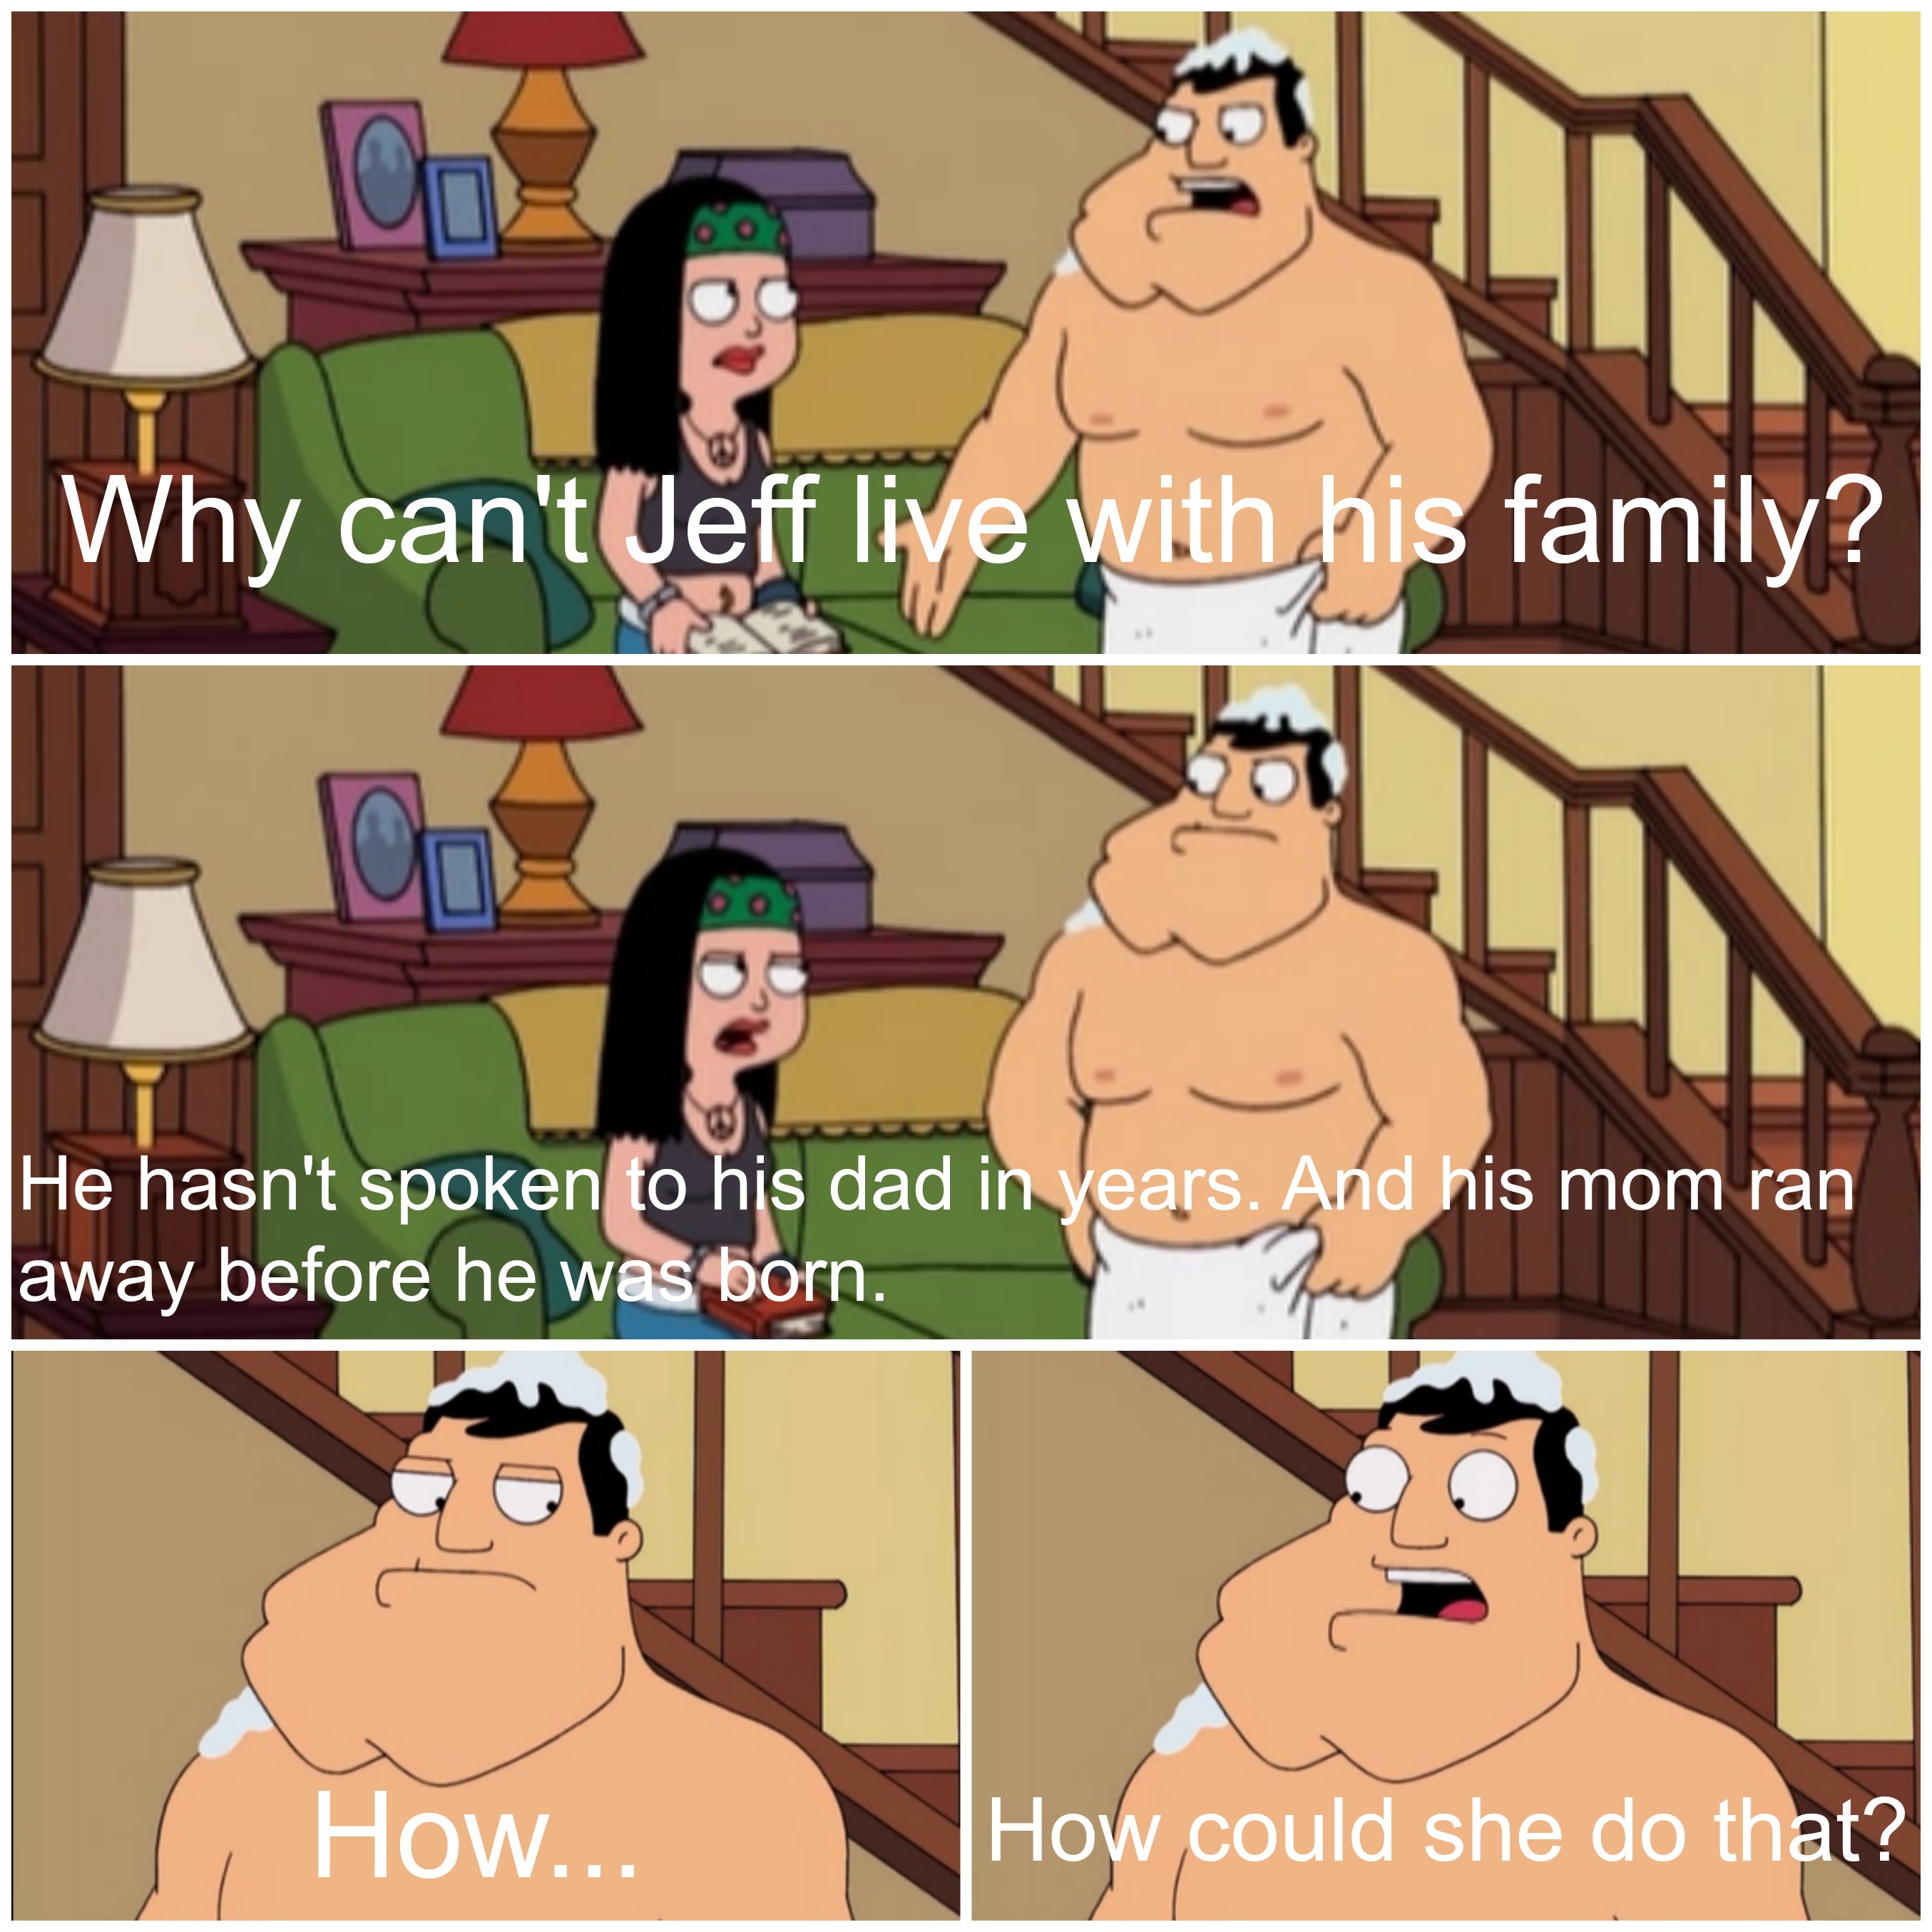 american dad love quotes - Why can'teff live with his family? He hasn't spoken to his dad in years. And his mom ran away before he was born. How... How could she do that?